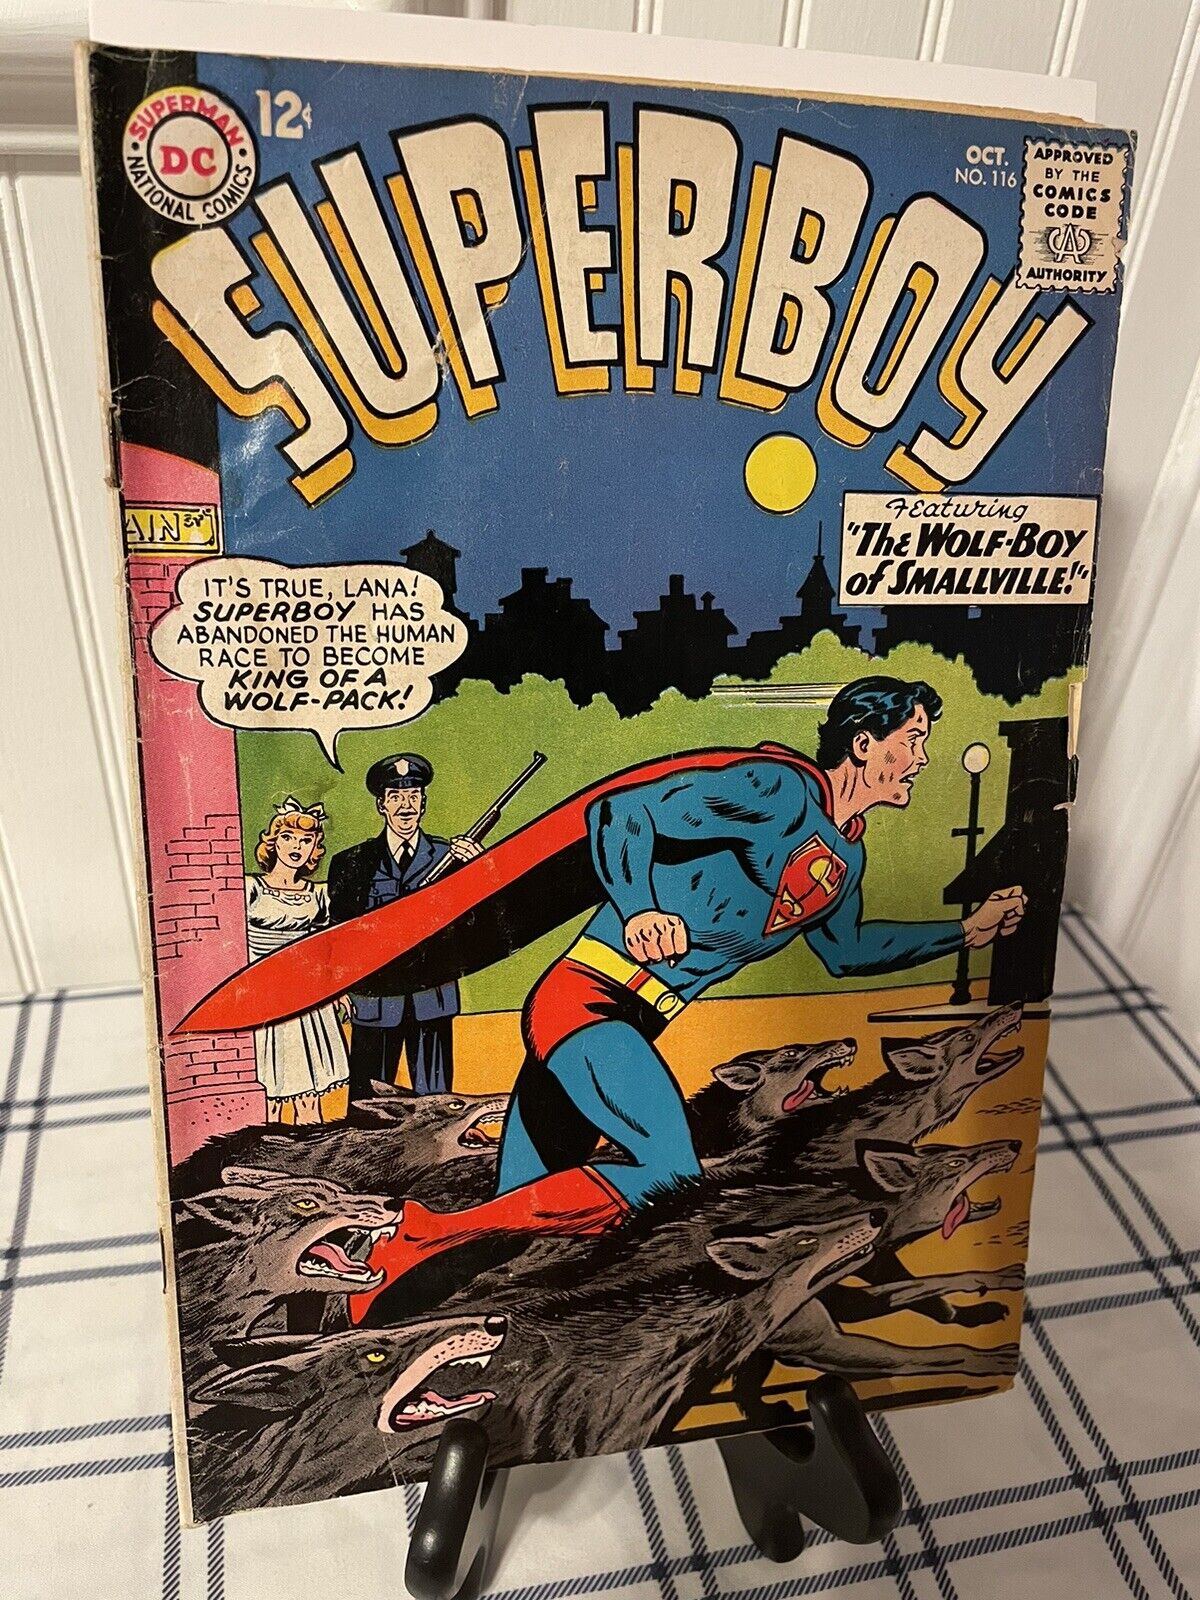 SUPERBOY #116 Silver Age DC comics 1964 WOLF-BOY OF SMALLVILLE